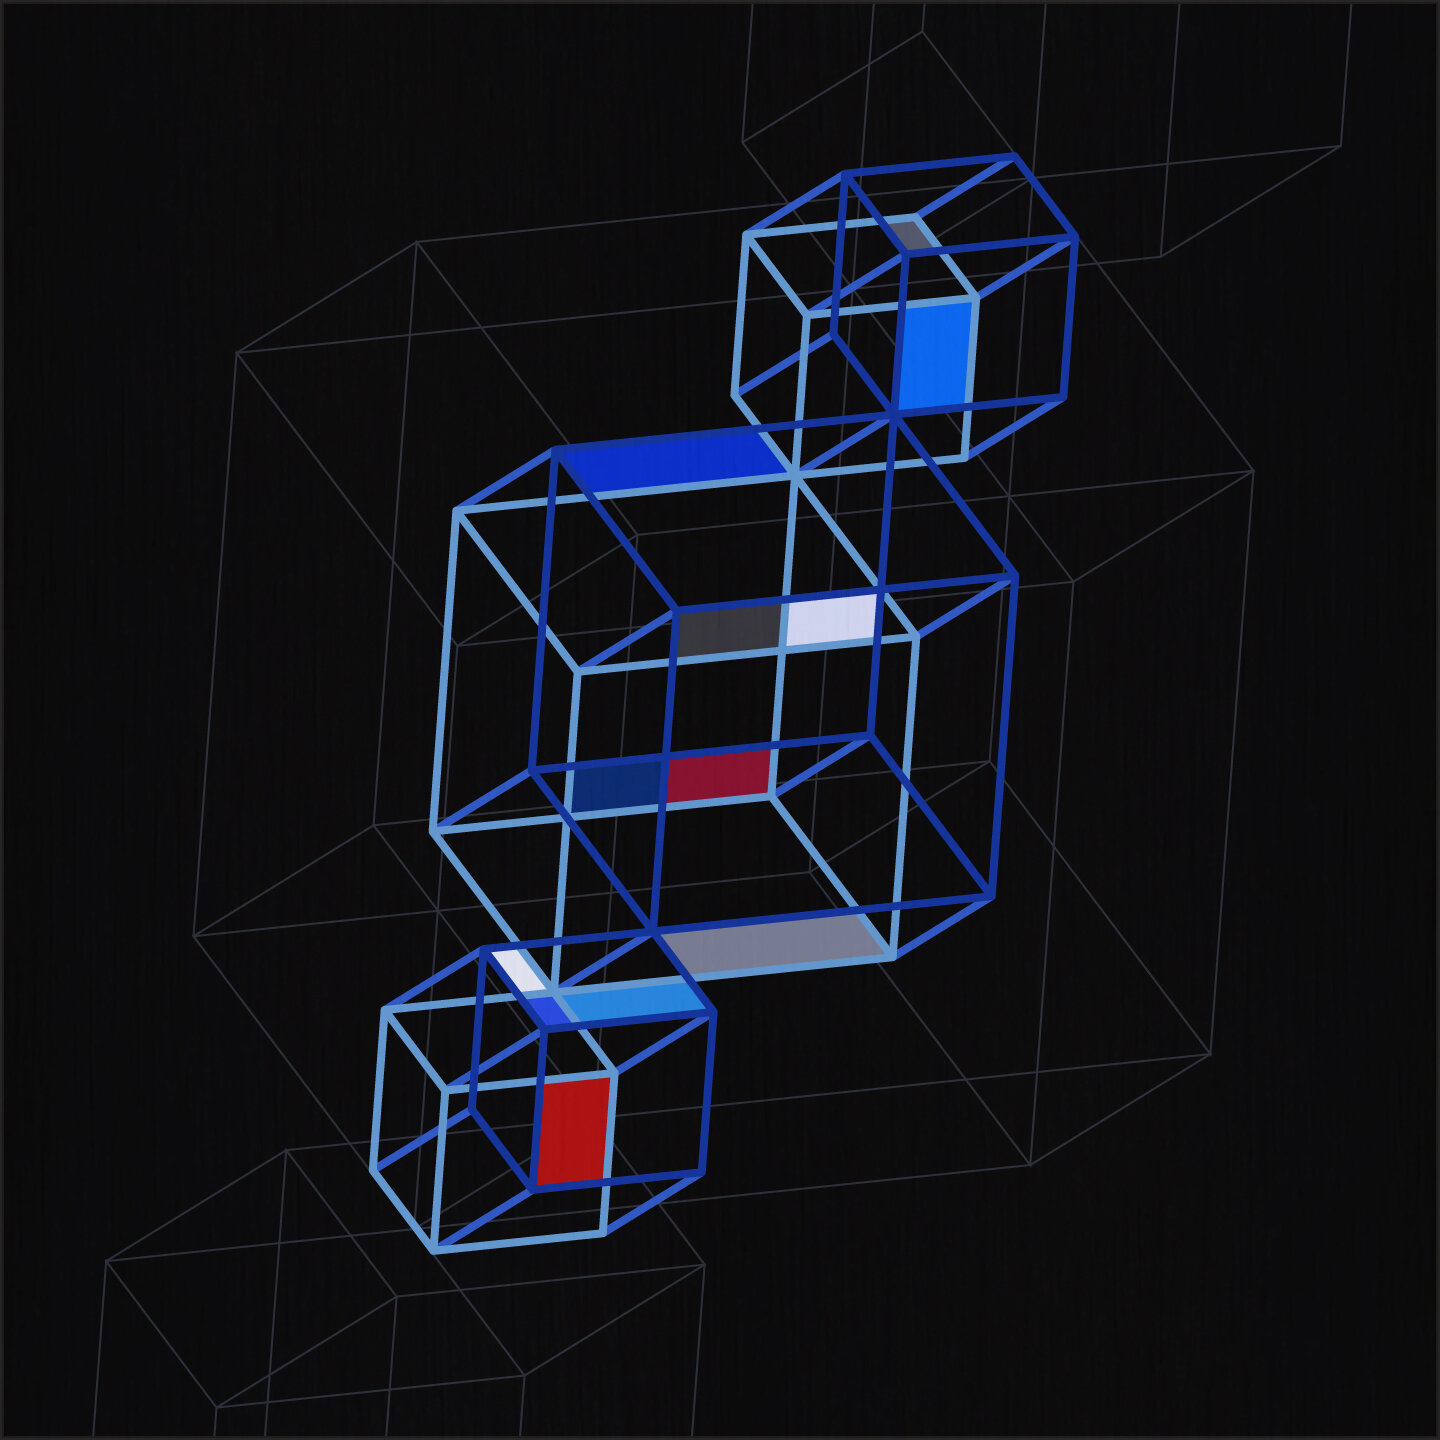 Conceptual-geometry [20200503] [Hypercube-space] [Blue-Red], acrylic on canvas 